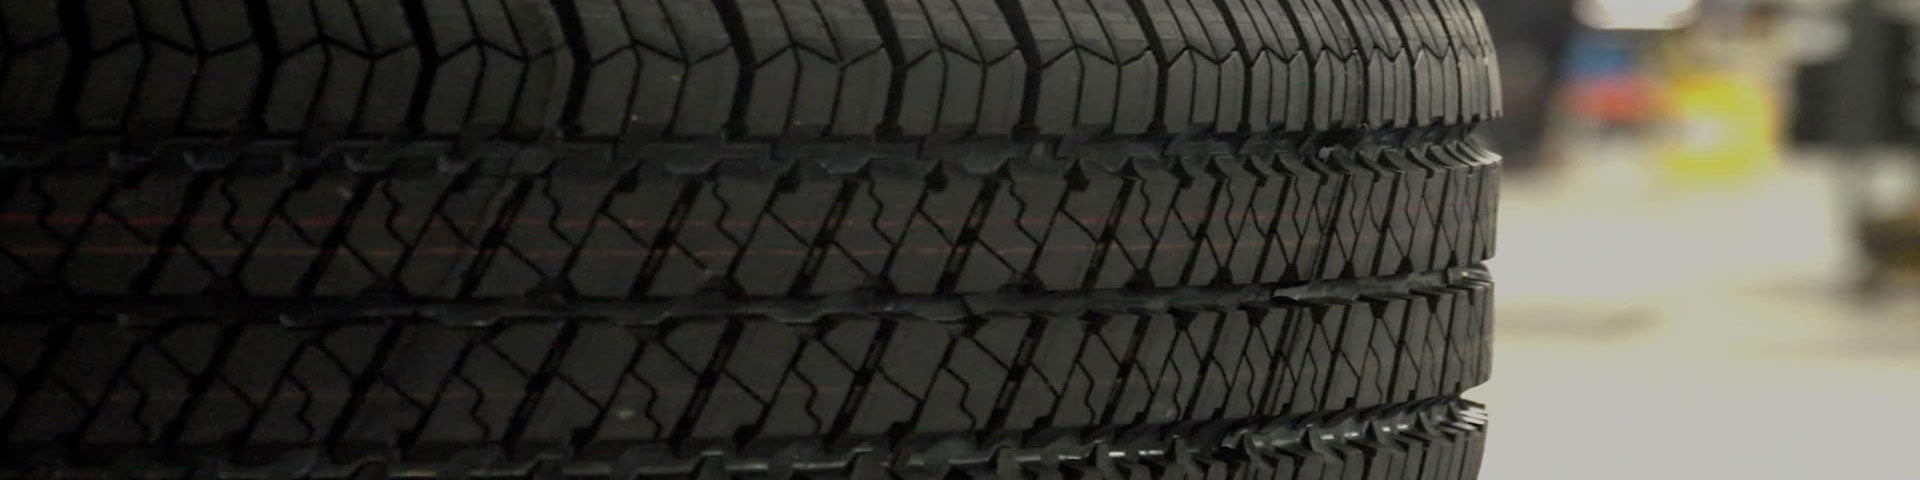 close up view of a tire laid down flat